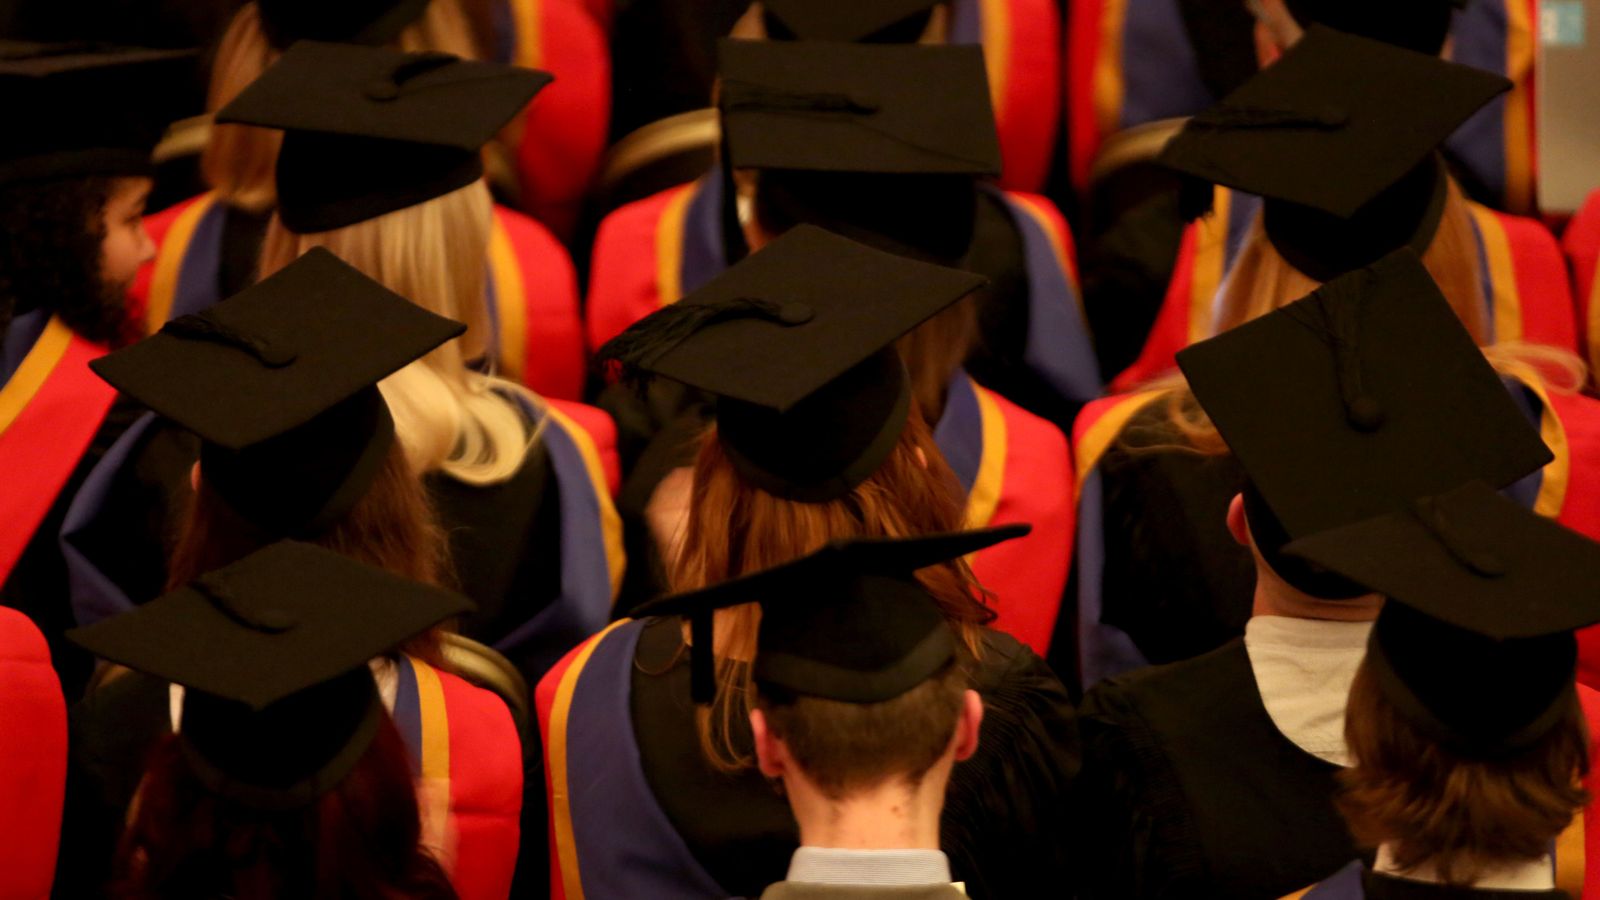 More than 100,000 students try to sue universities over disruption to their studies